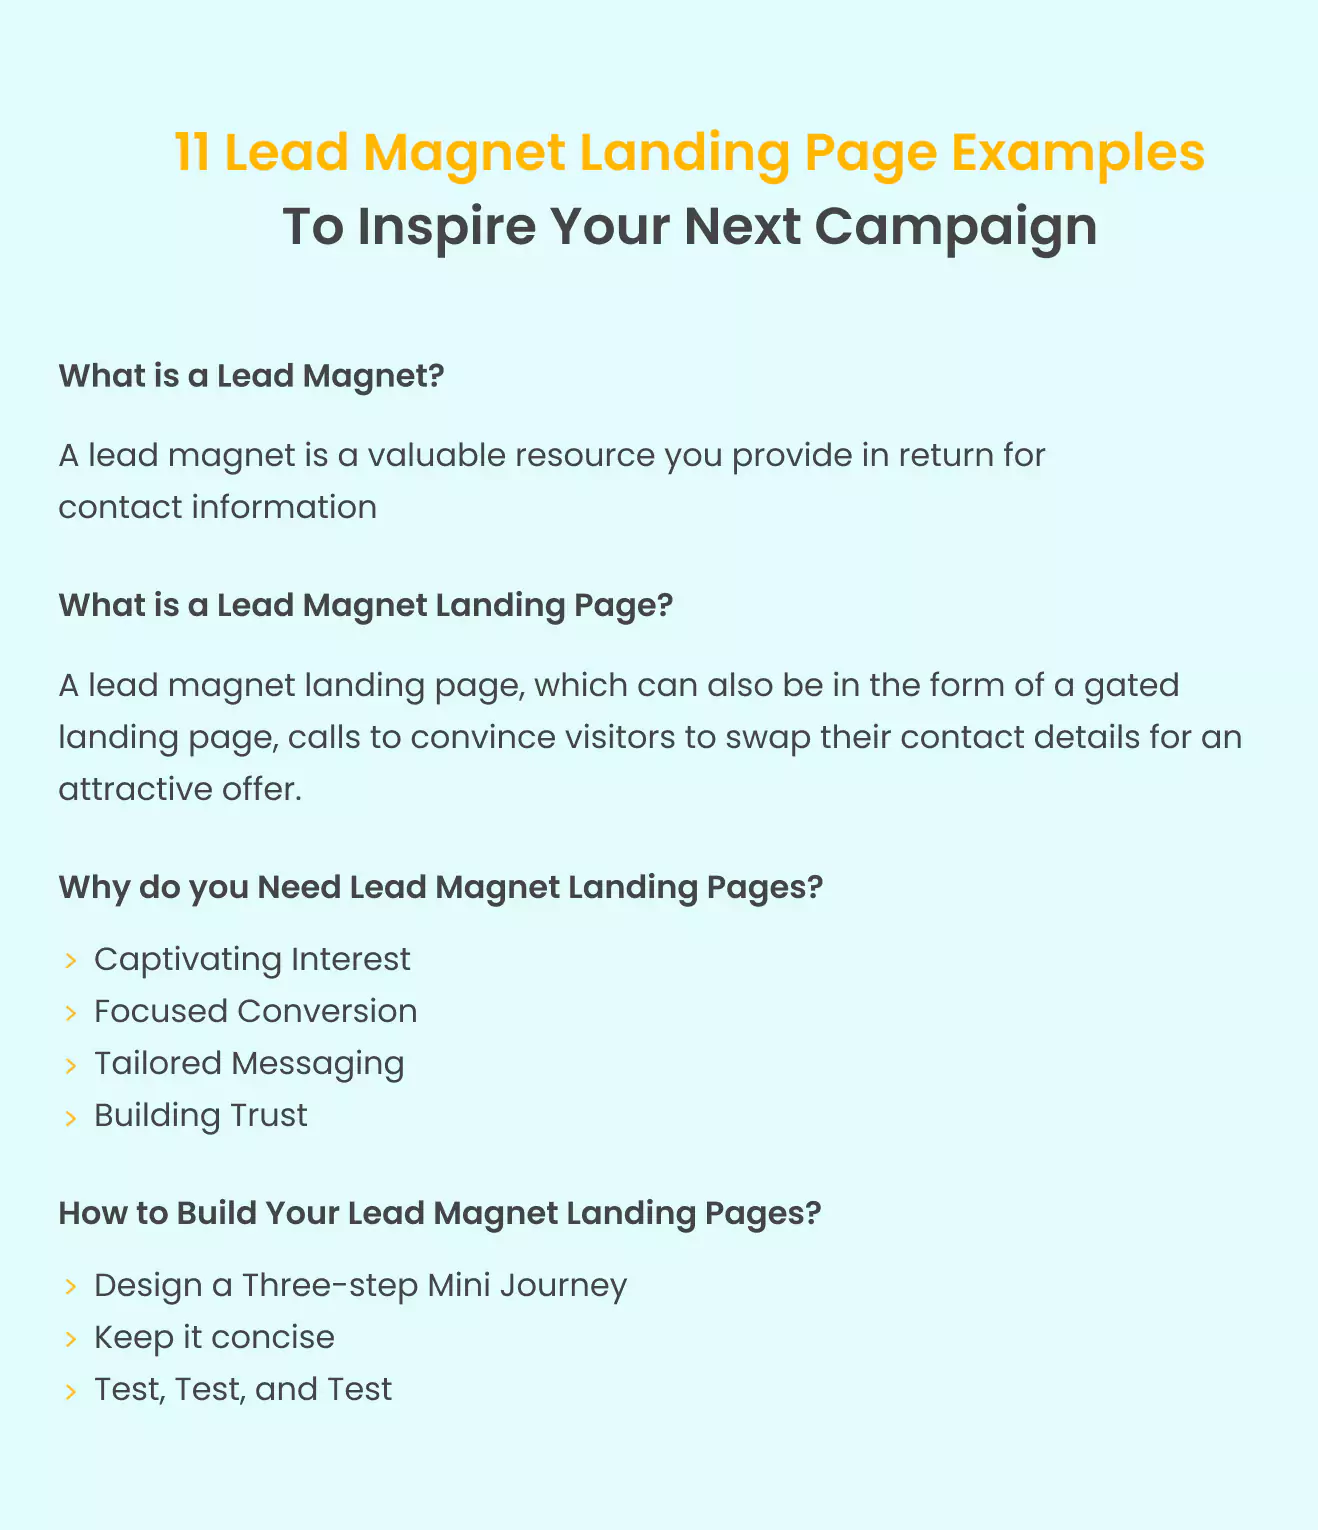 11-lead-magnet-landing-page-examples-to-inspire-your-next-campaign-summary.webp